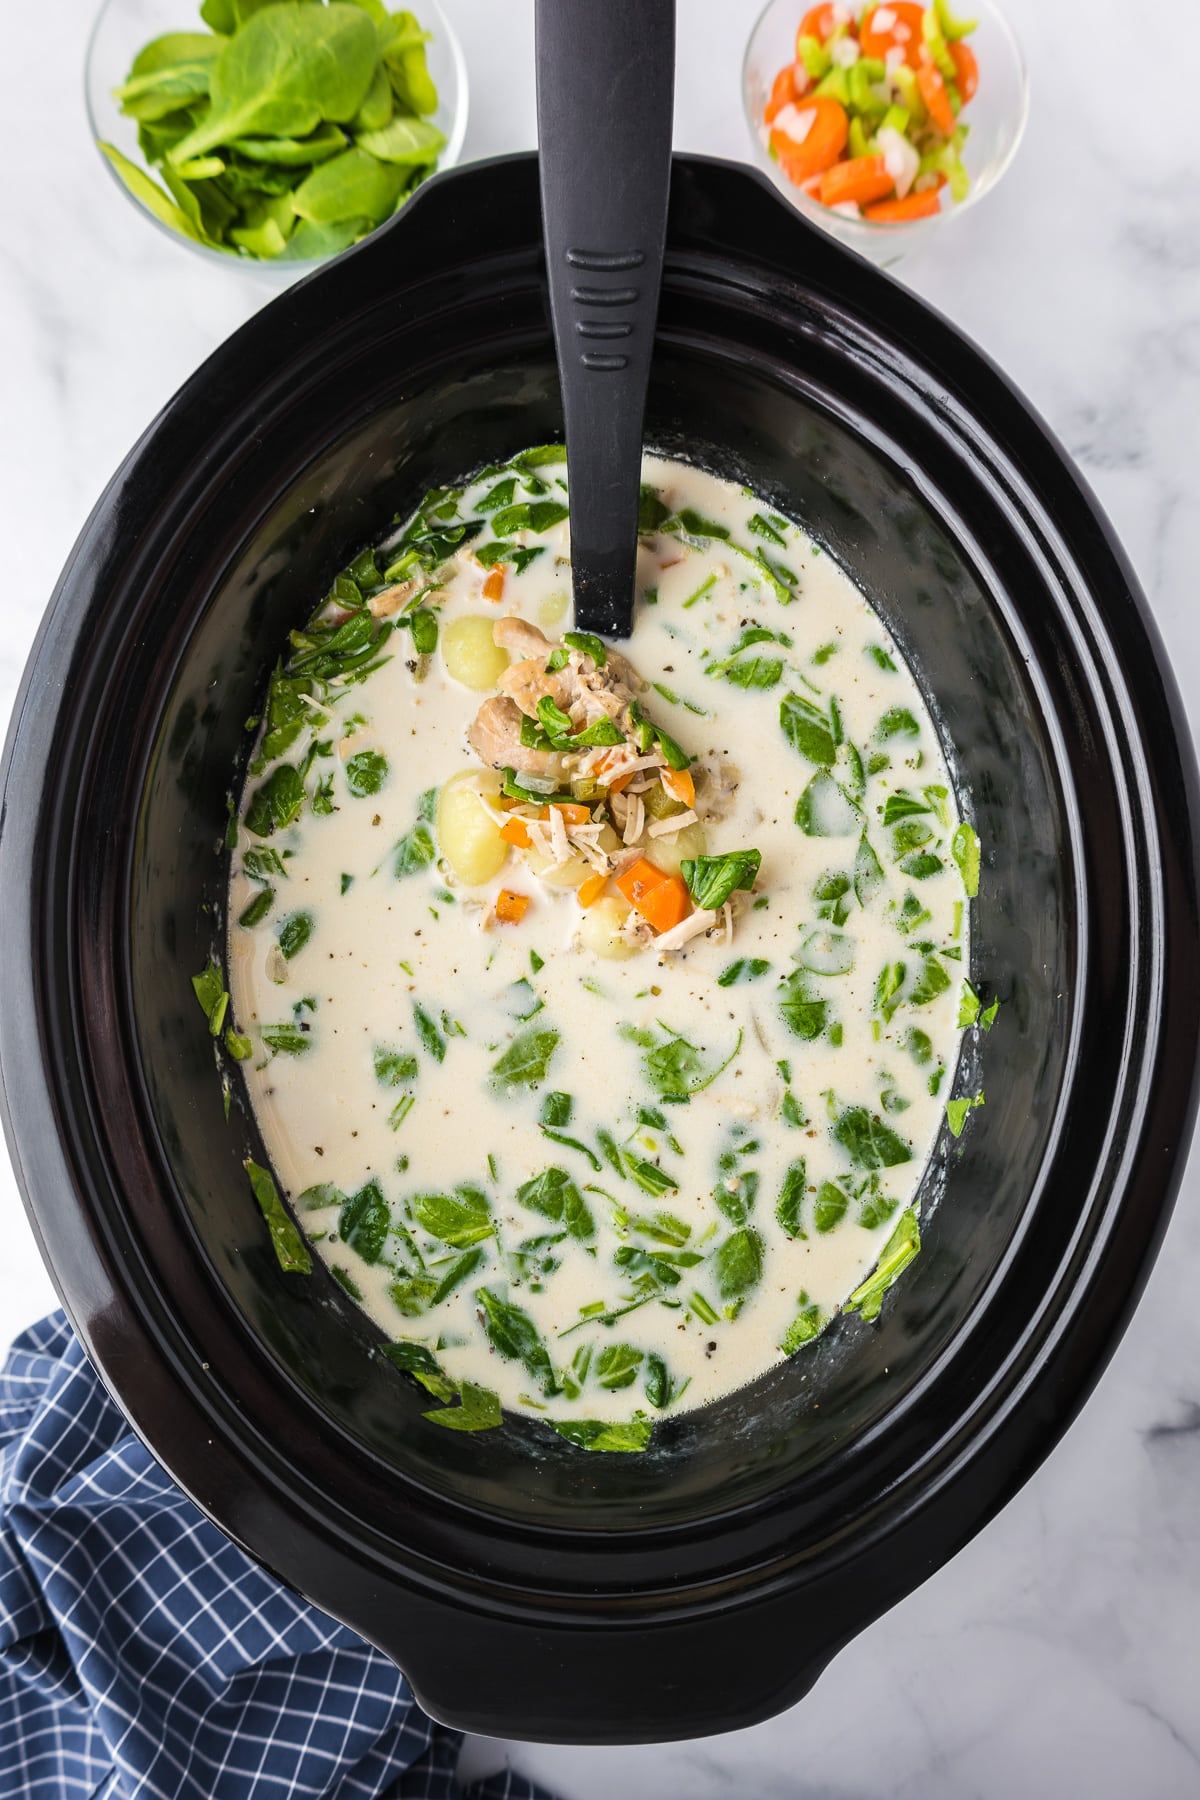 A slow cooker filled with a creamy gnocchi soup and spinach.